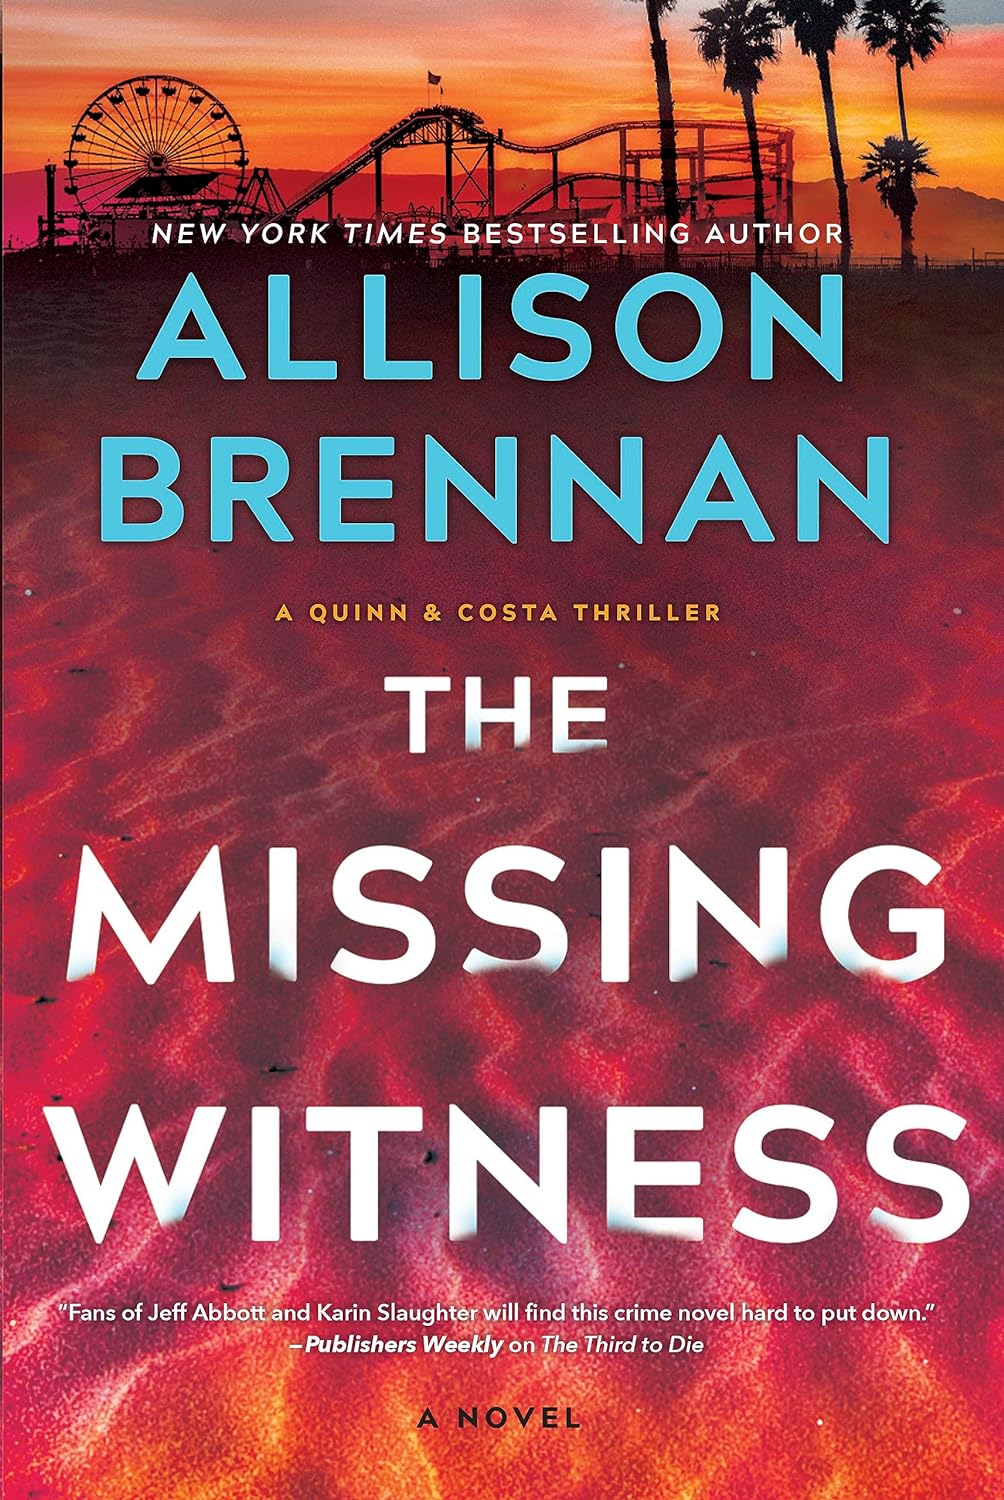 Image for "The Missing Witness"